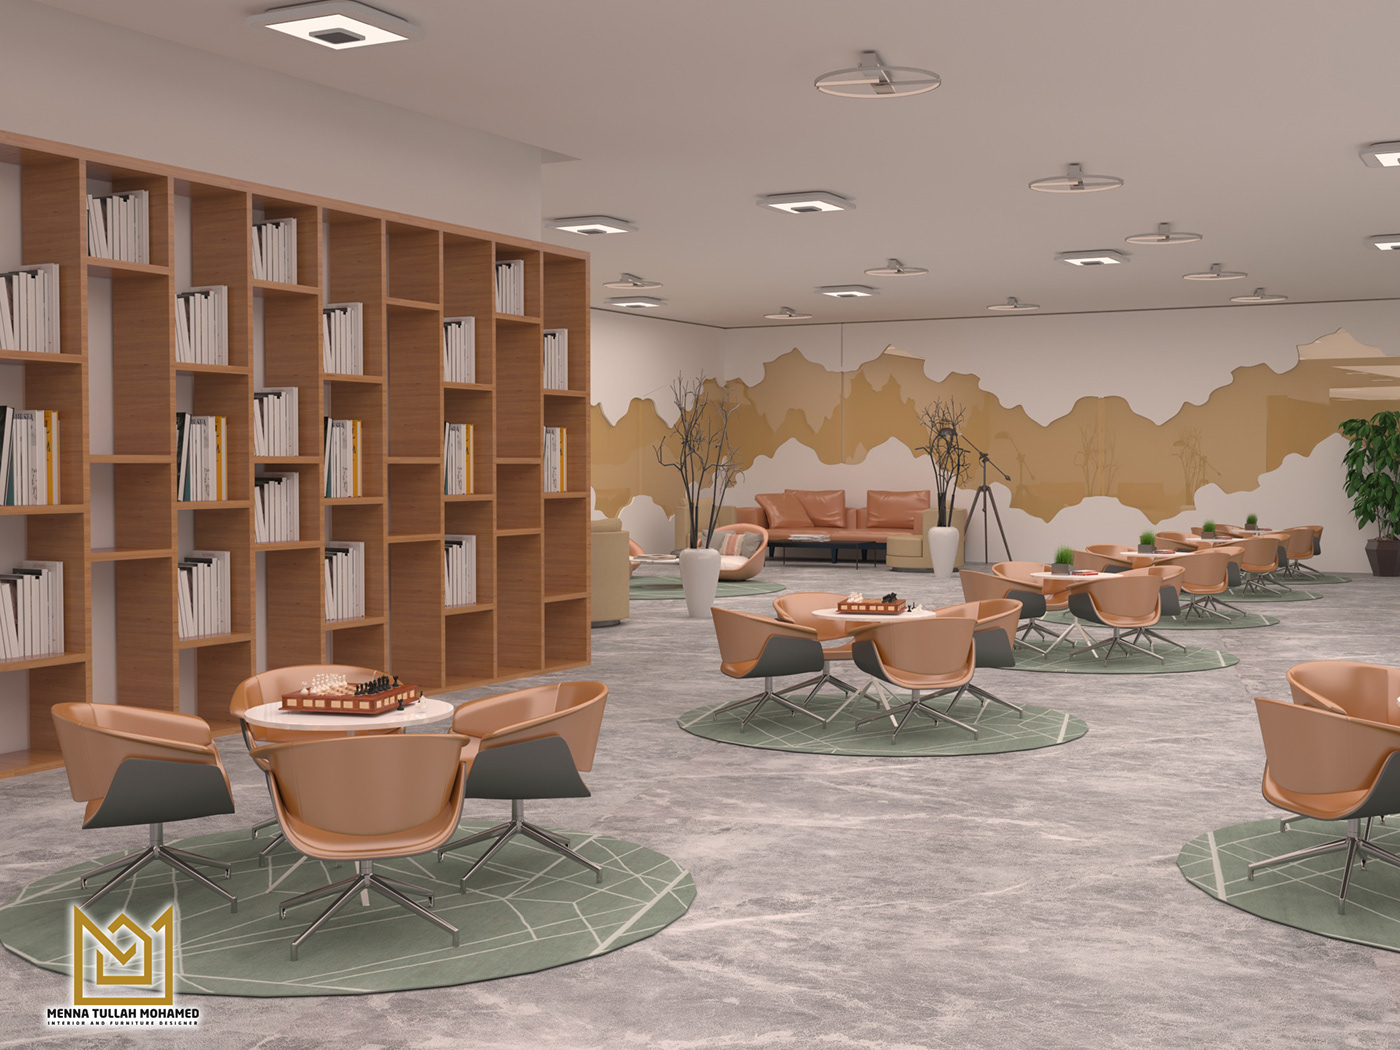 3ds max architecture communication interior design  modern People with special needs rehabilitation Render visualization vray